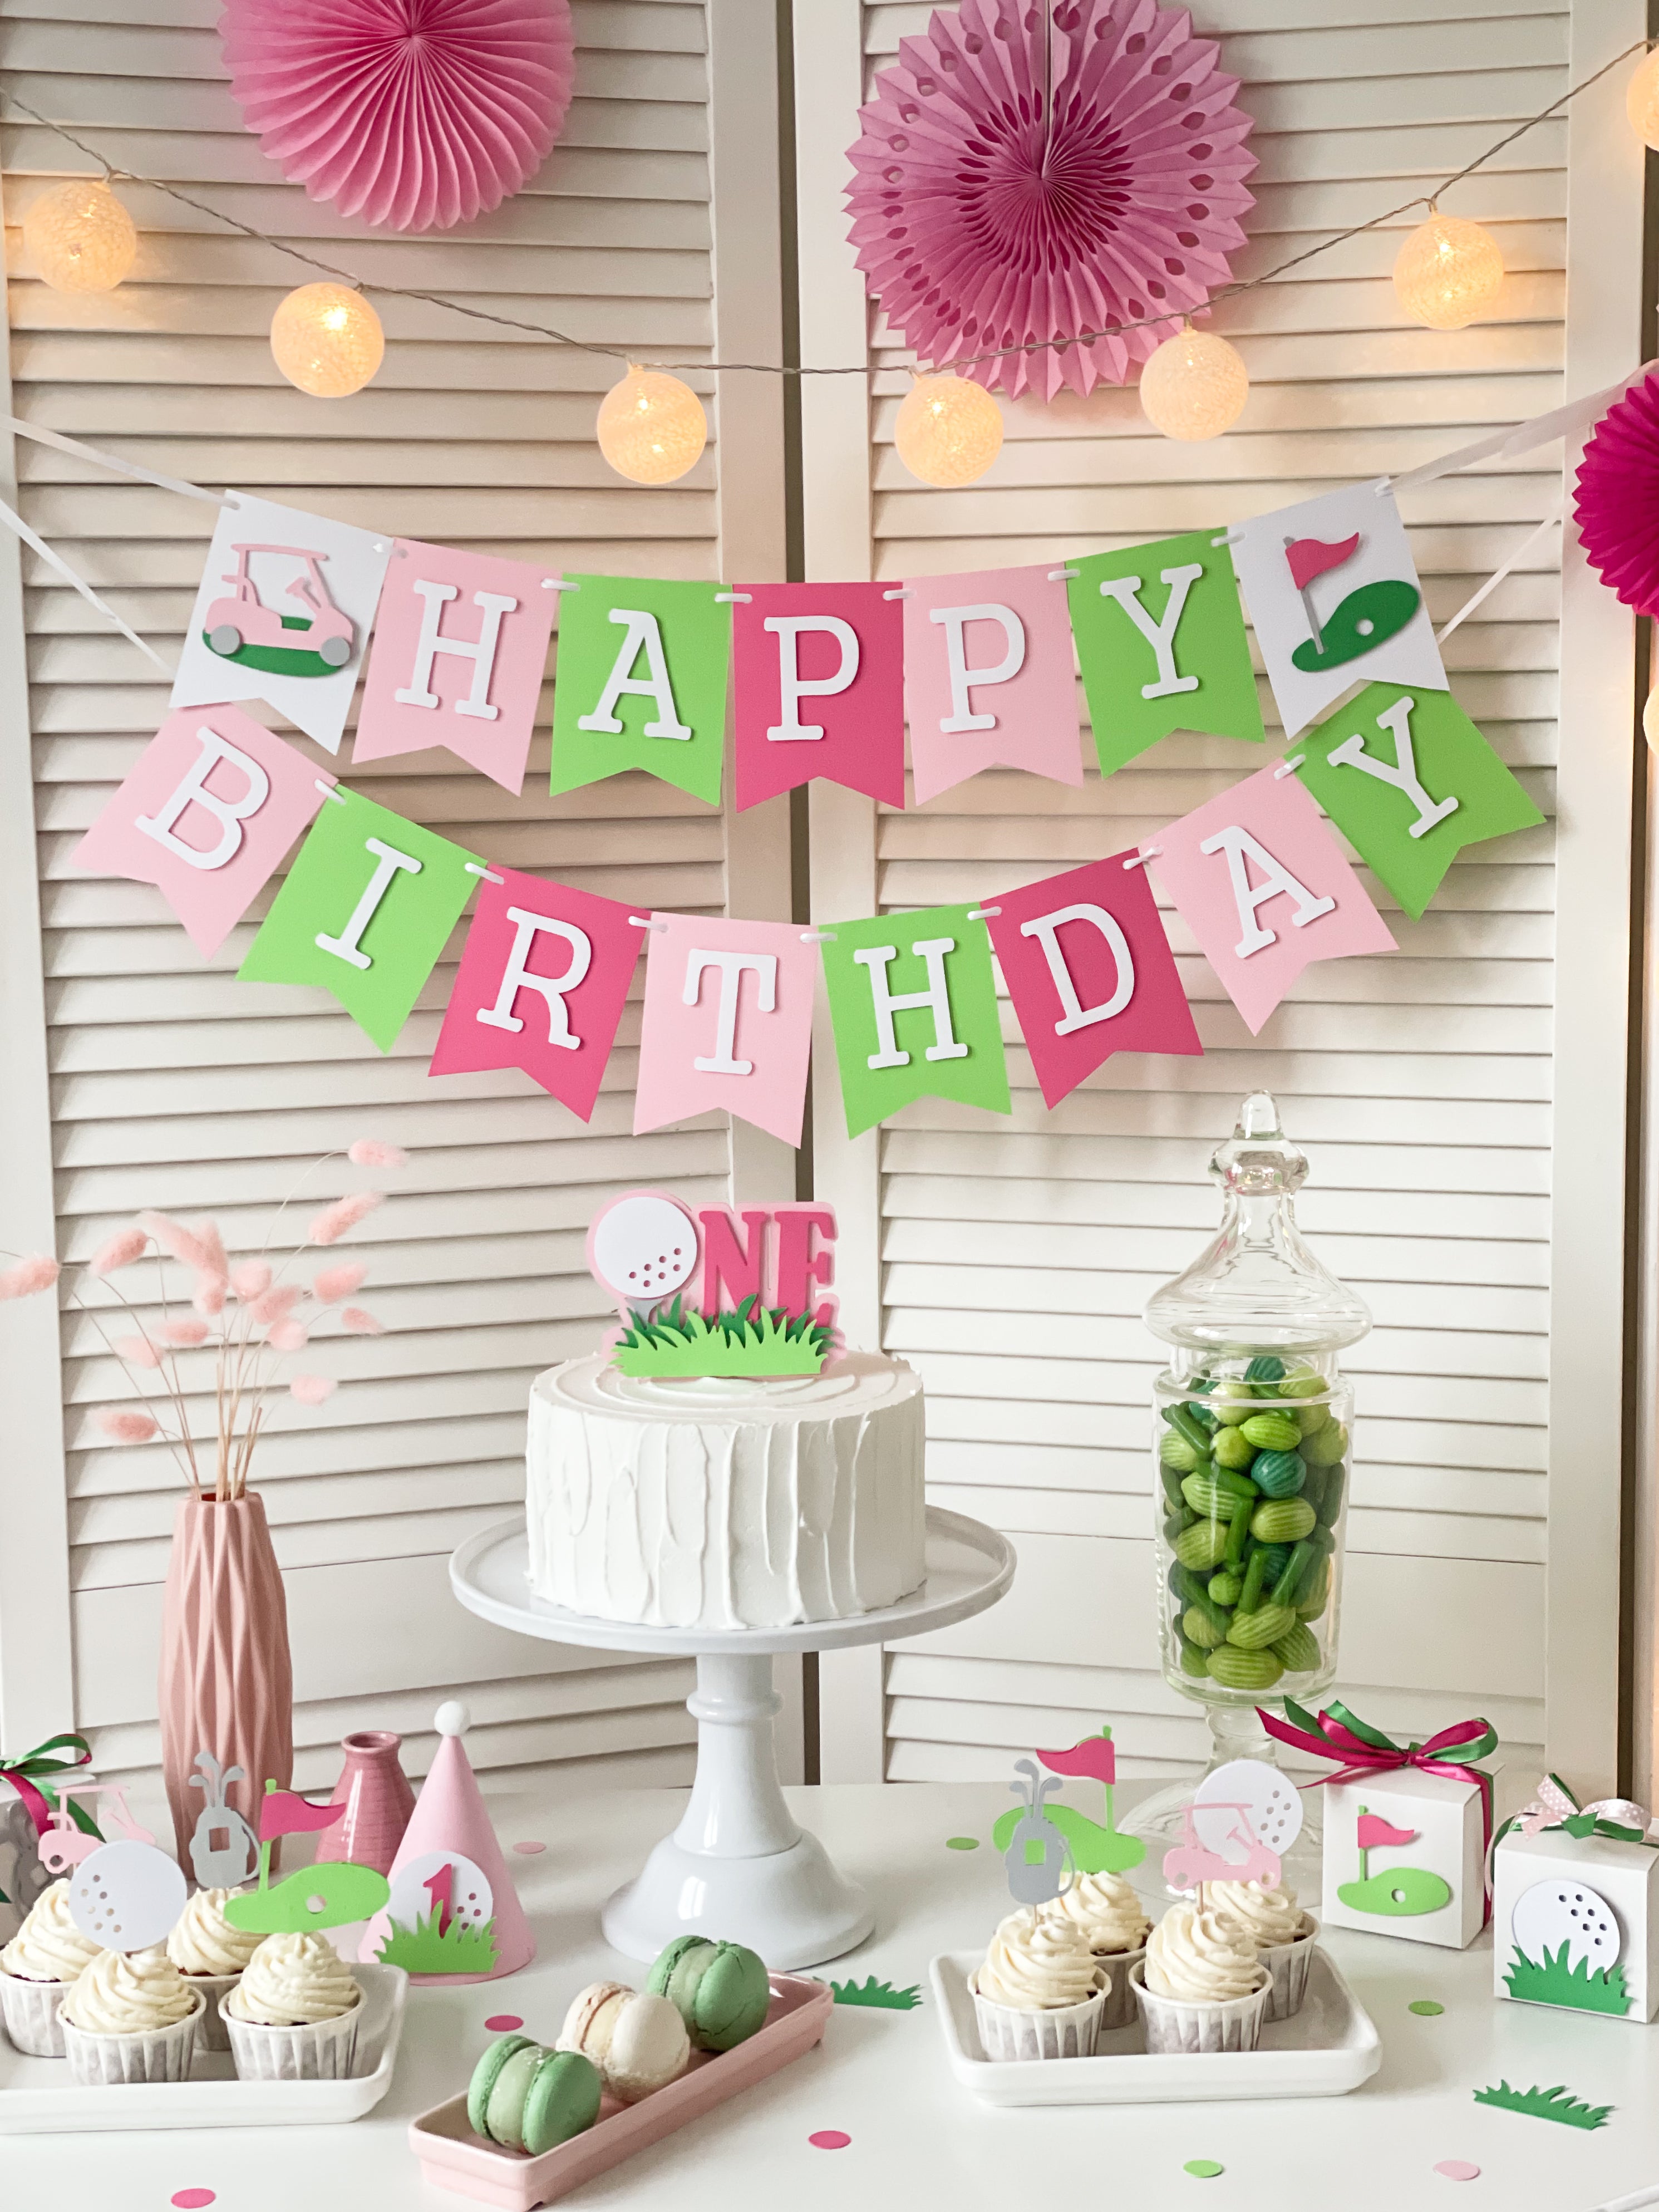 Hole In One Girl First Birthday Banner Girls Pink Golf 1st Birthday Party Decor Golf Theme Birthday Girls Golf Party 1 Year Old Birthday